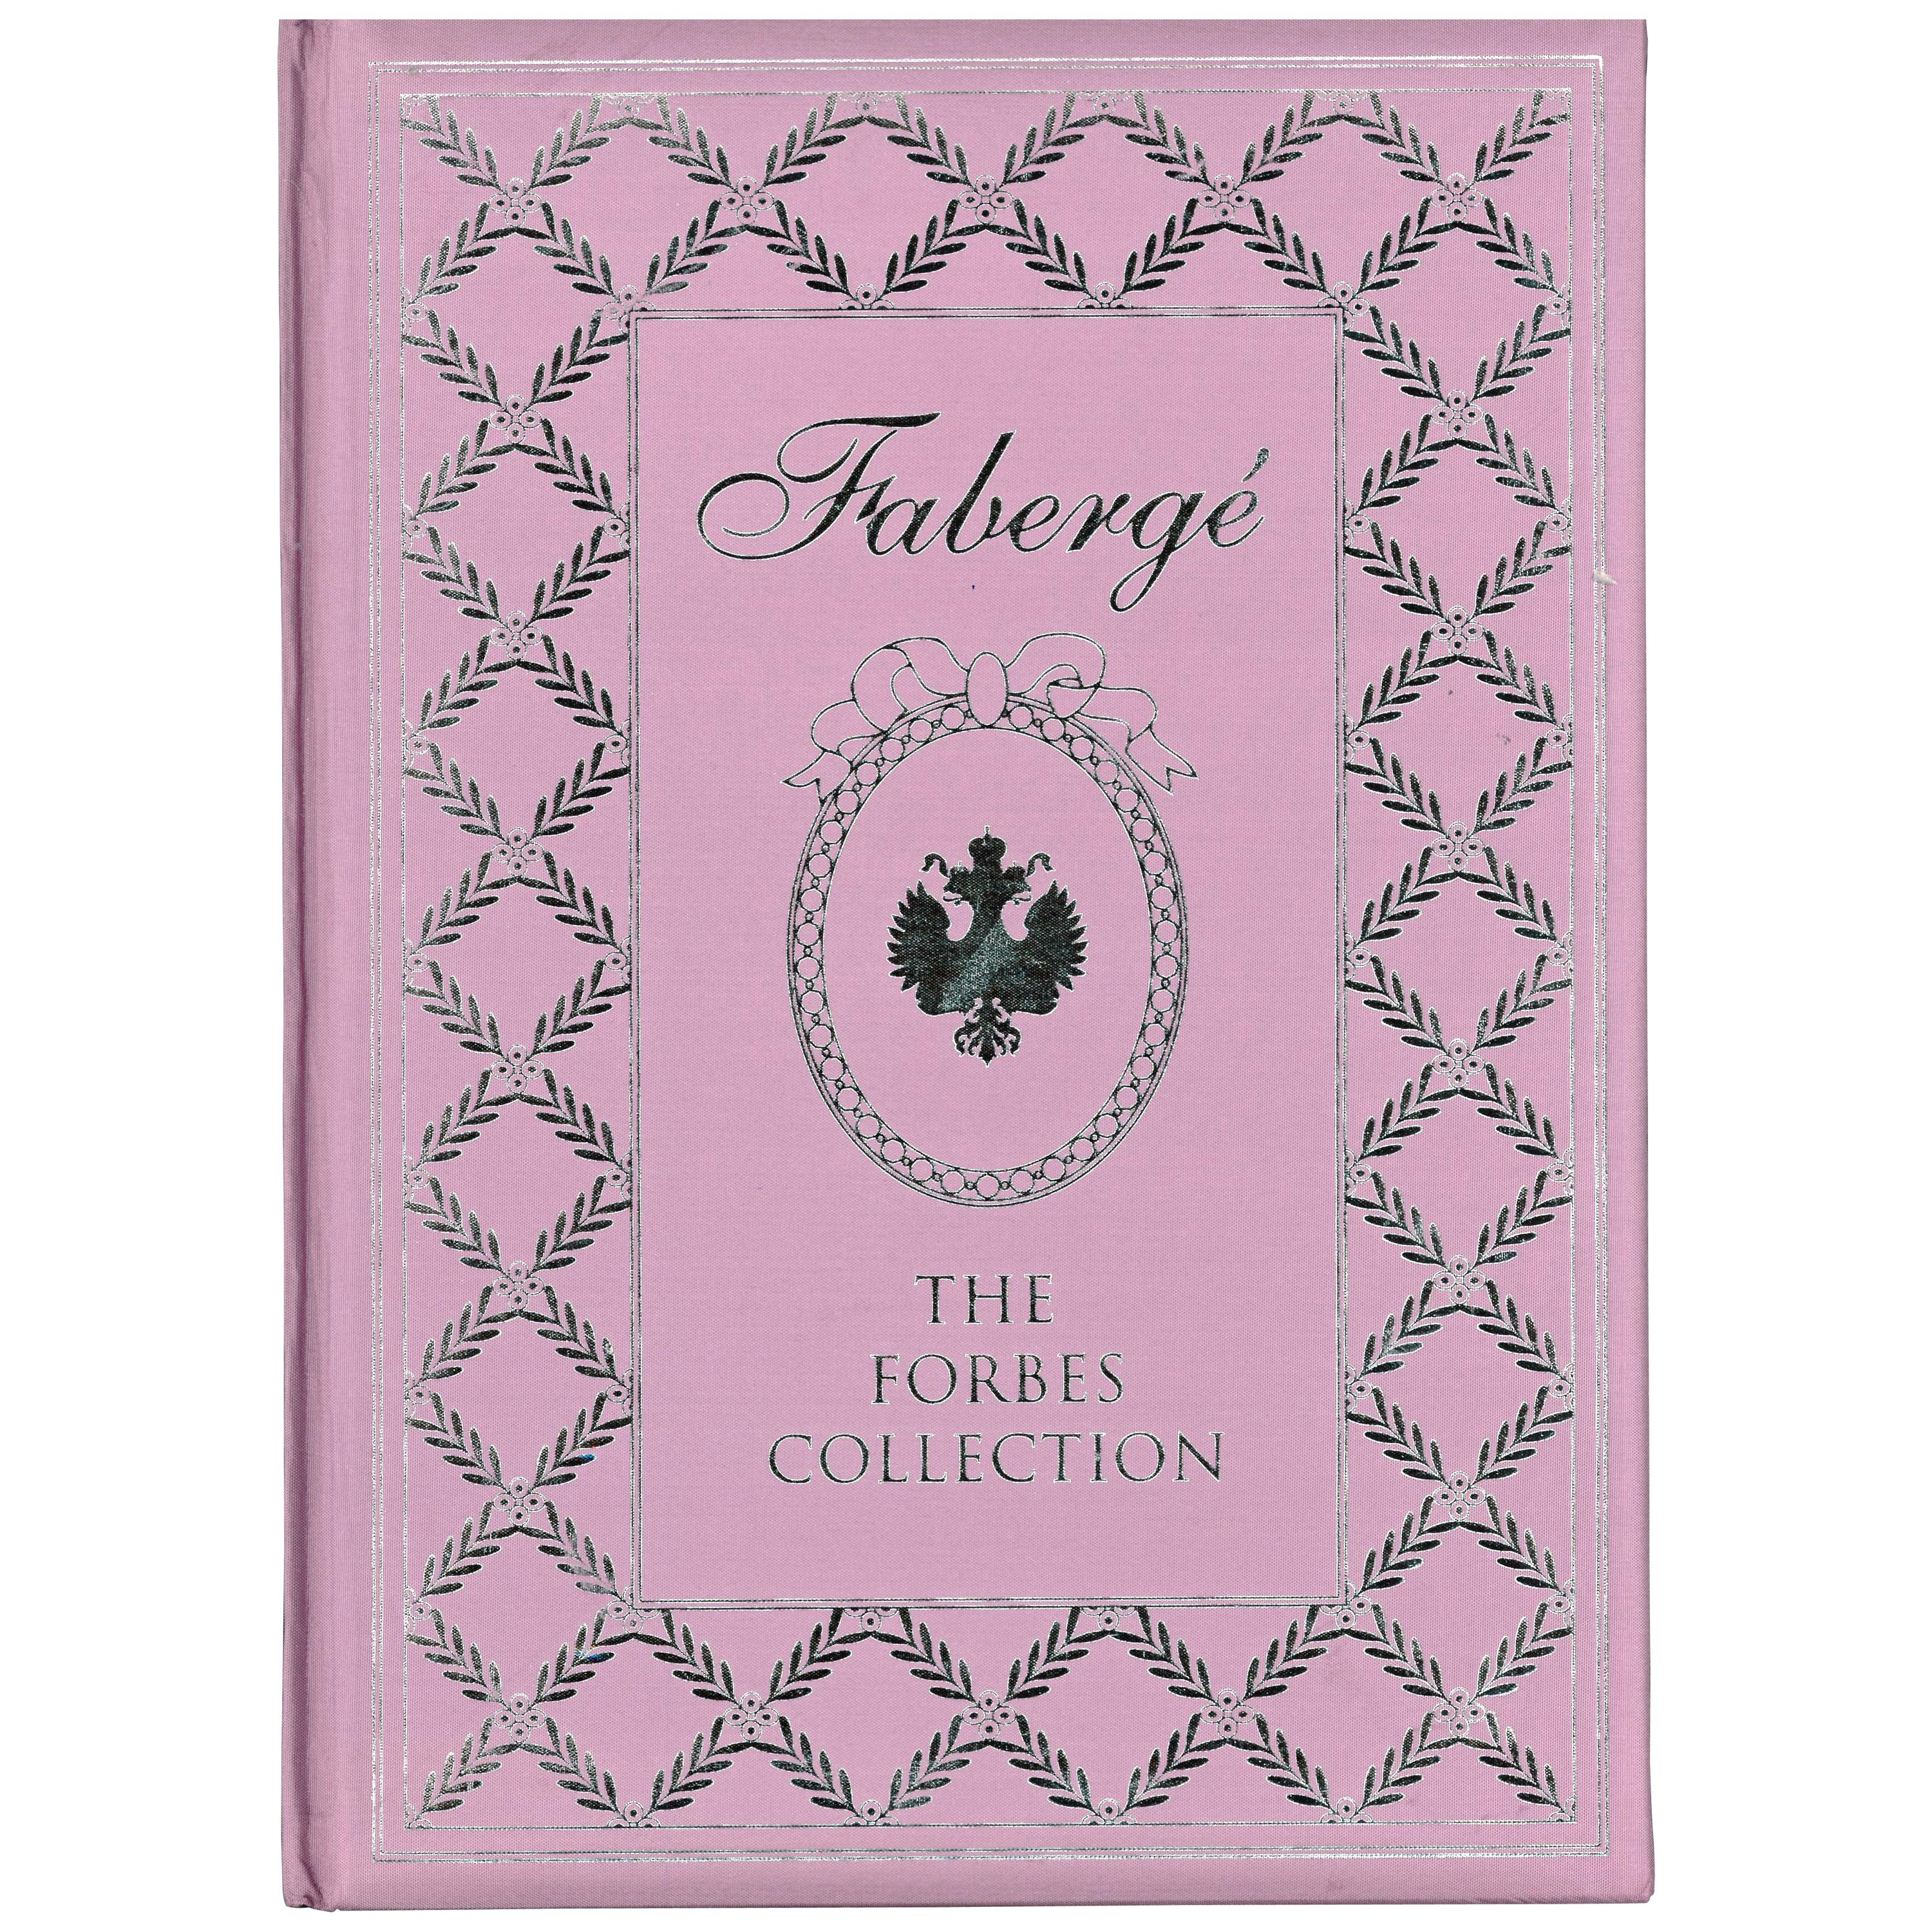 Faberge, The Forbes Collection ‘Book’